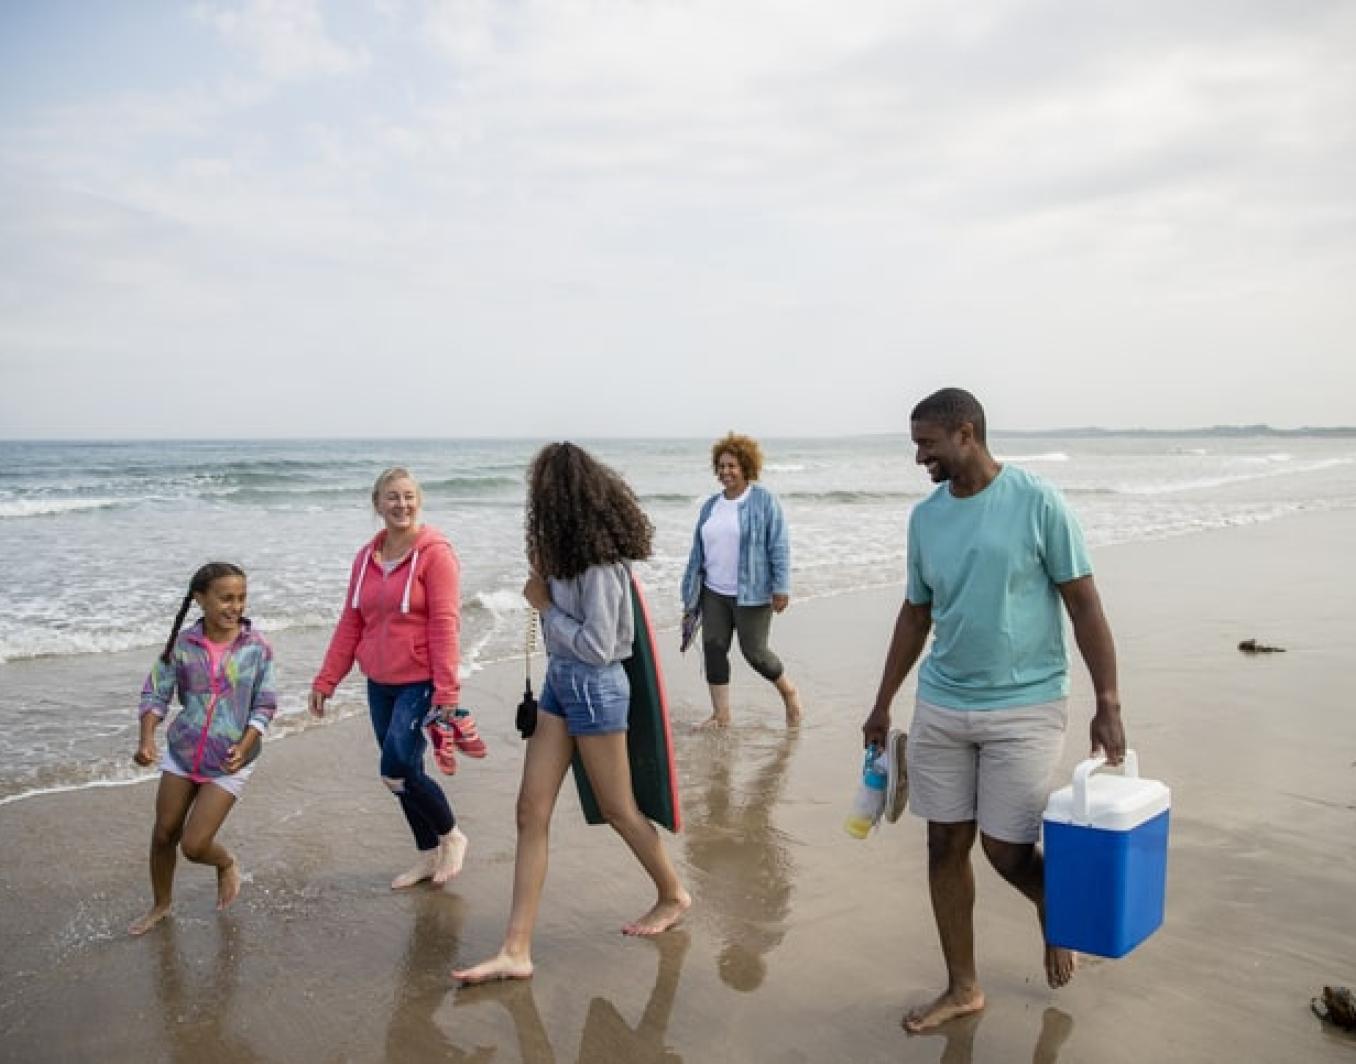 Adults and children walking on a beach.